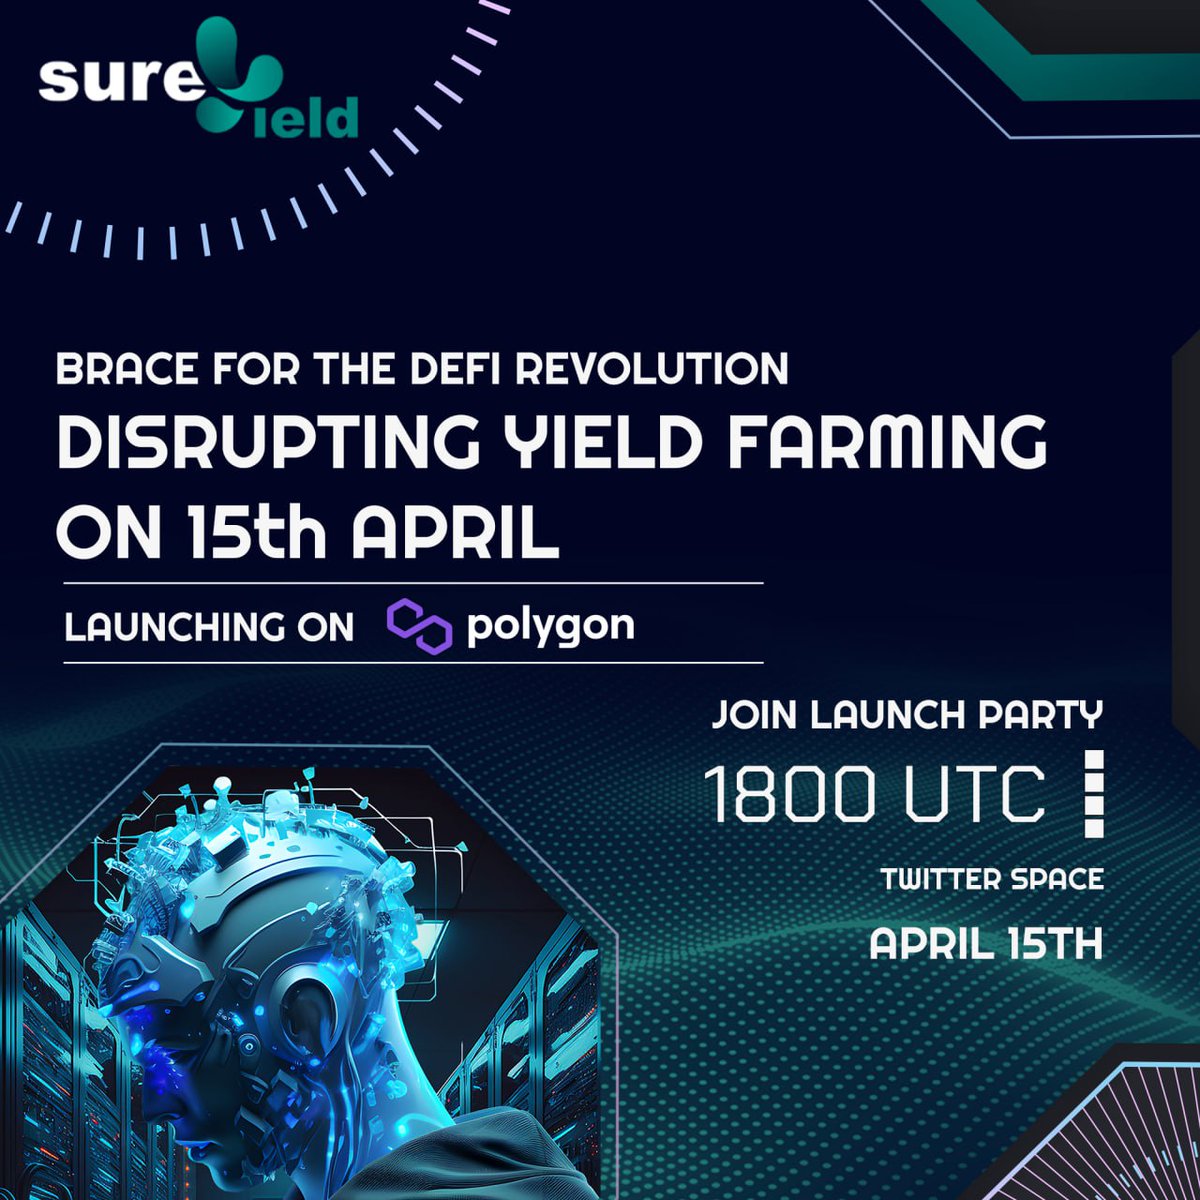 🚀 Brace yourself for the launch of @SureYieldcom today!🌟 SureYield is an innovative multi-chain liquidity protocol powered by AI, ready to supercharge your yield earnings!💰 Join their launch party at 18:00 UTC for exciting rewards!👇 twitter.com/i/spaces/1lPKq… #Sponsored